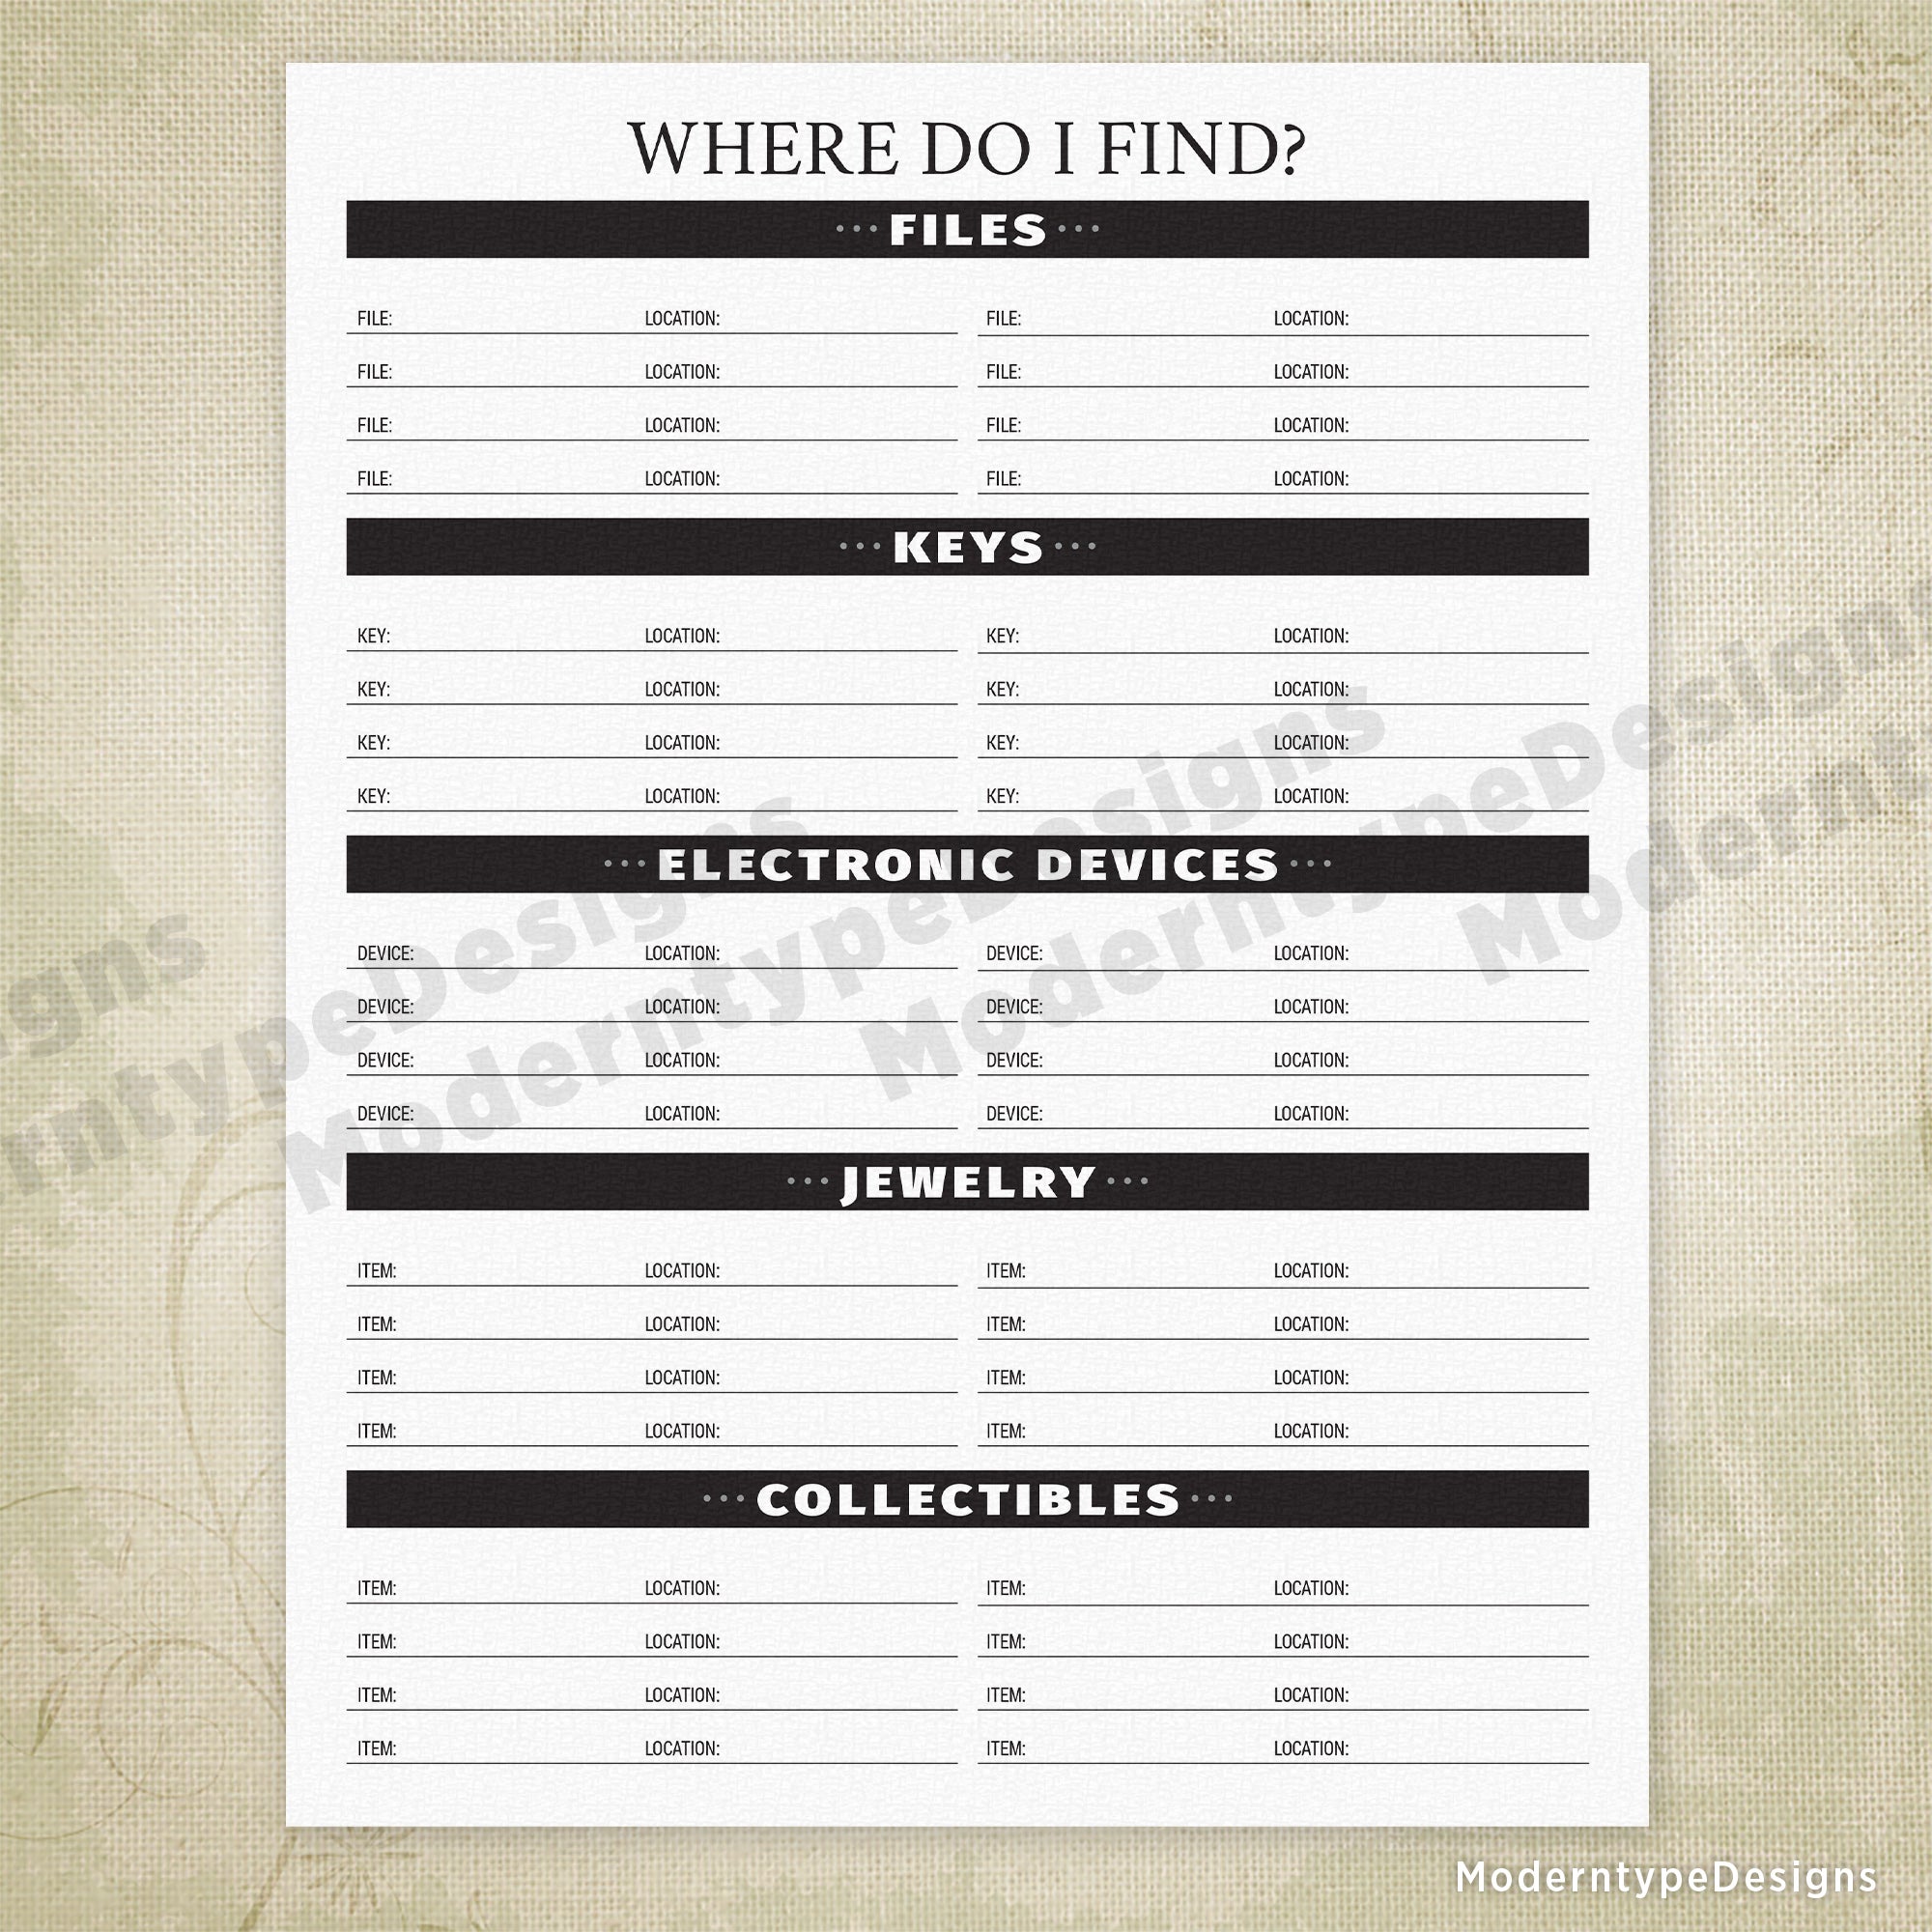 Where Do I Find? Printable - End of Life